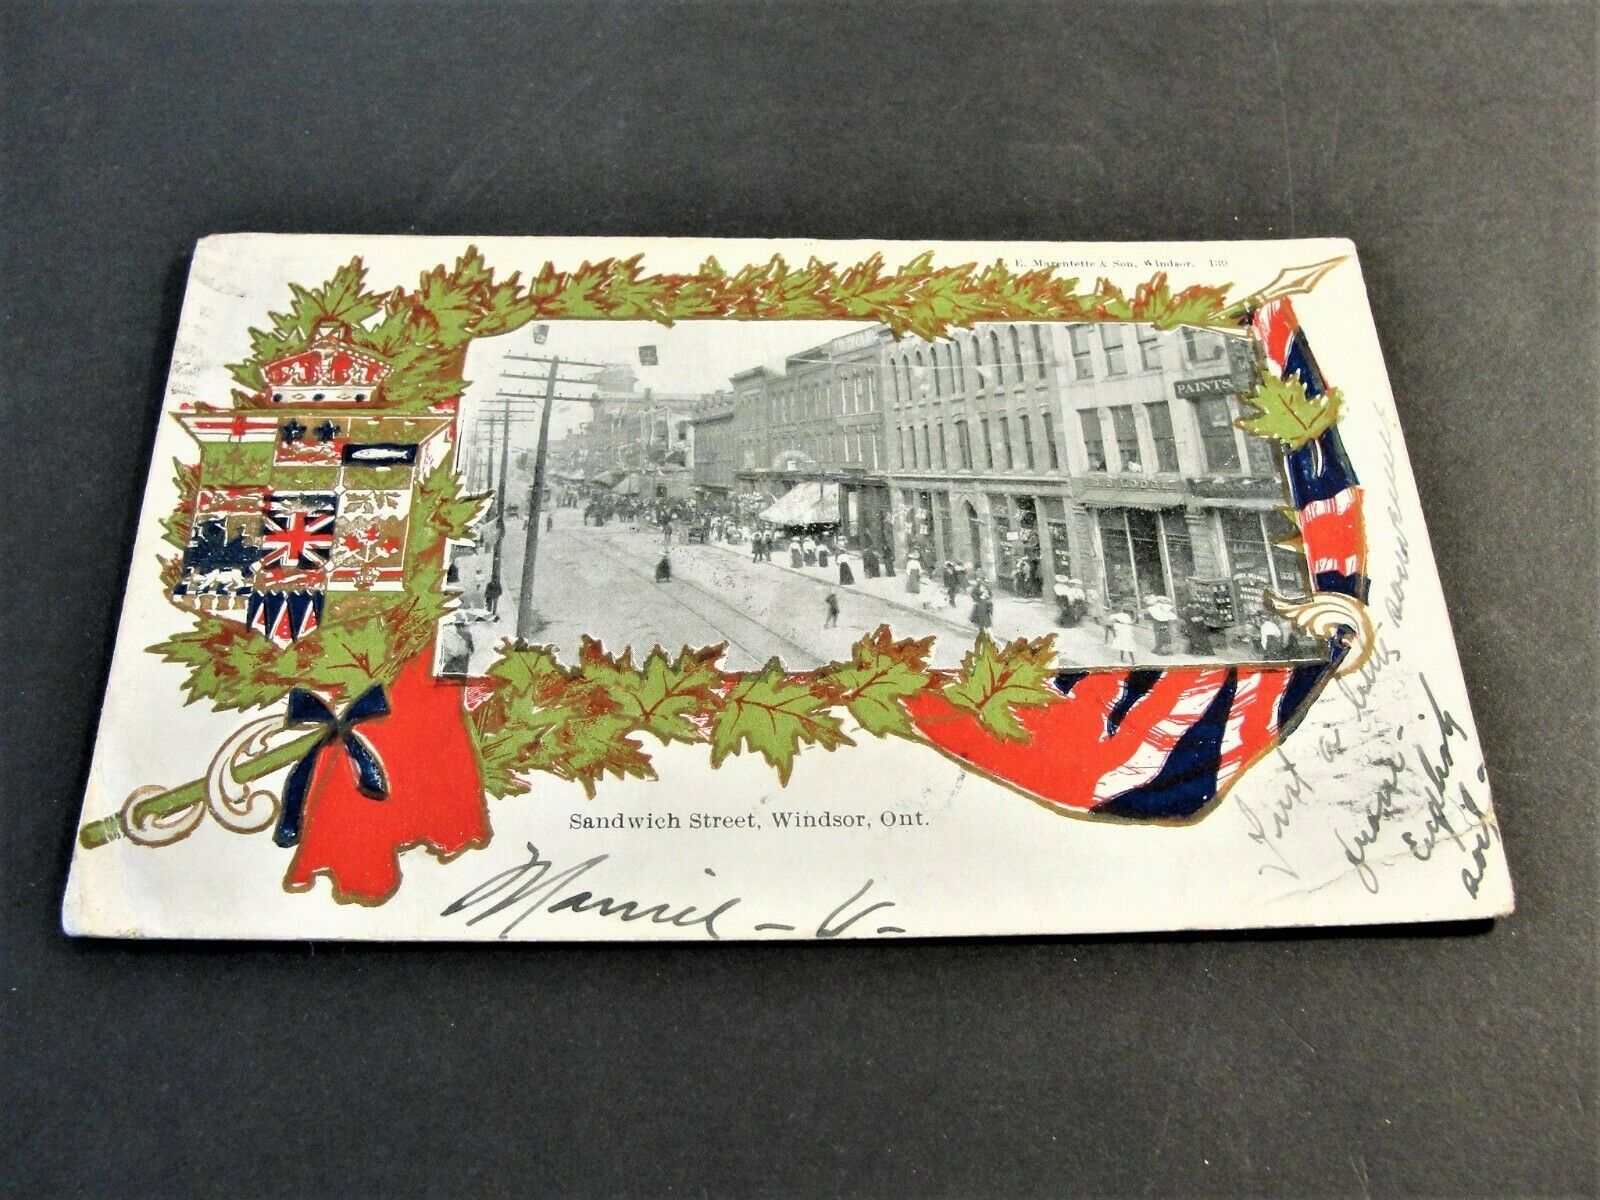 Primary image for Sandwich Street, Windsor, Ontario - Canada-1906 Postmarked Postcard. RARE.